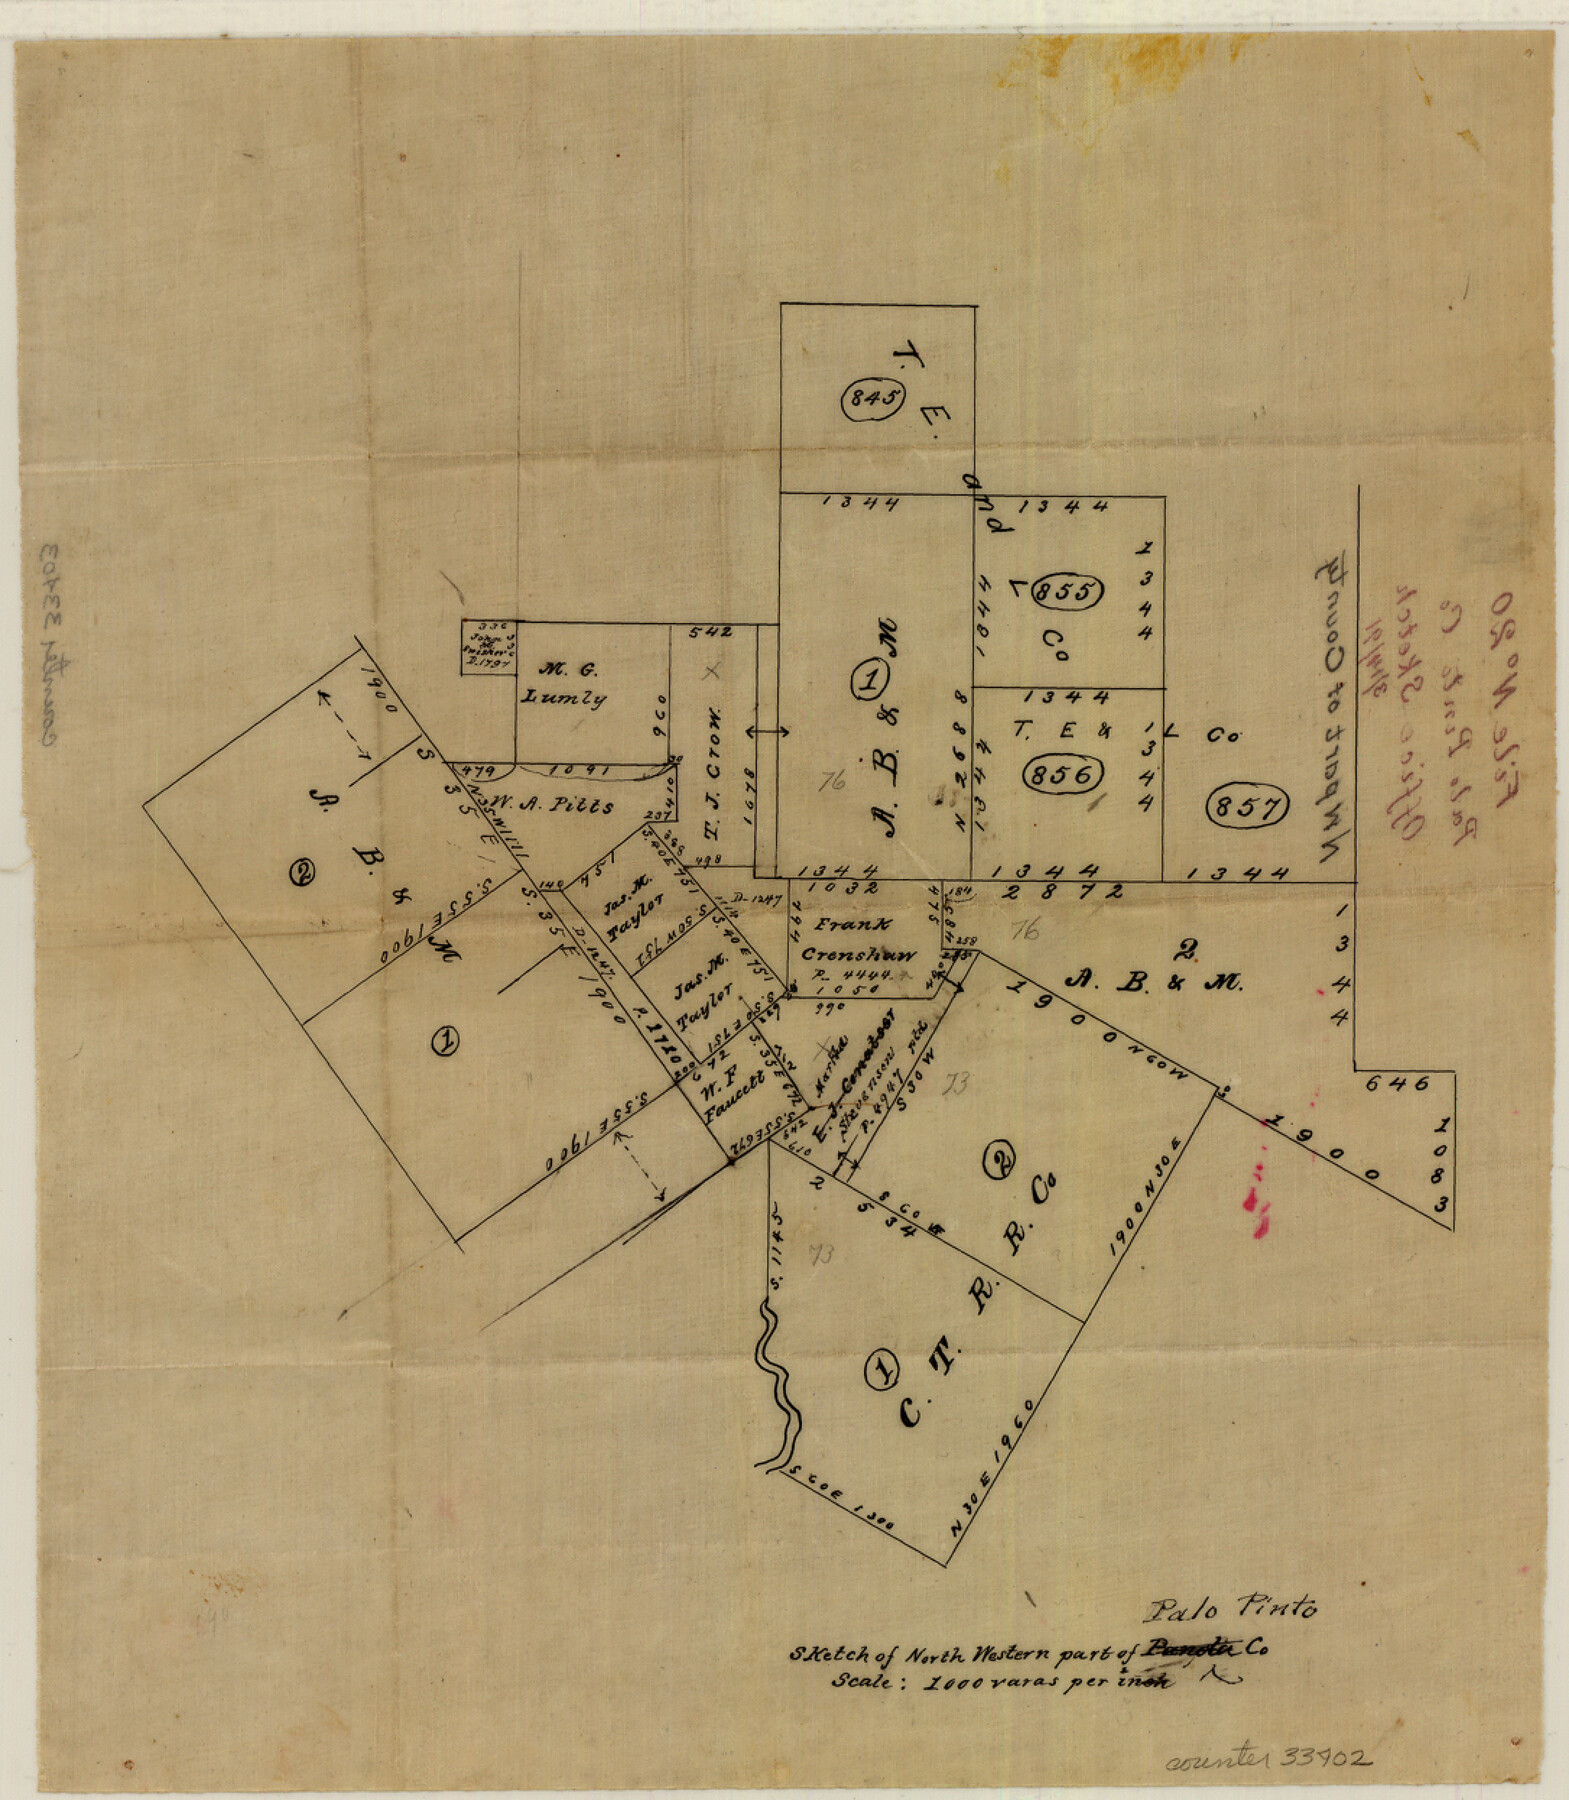 33402, Palo Pinto County Sketch File 20, General Map Collection